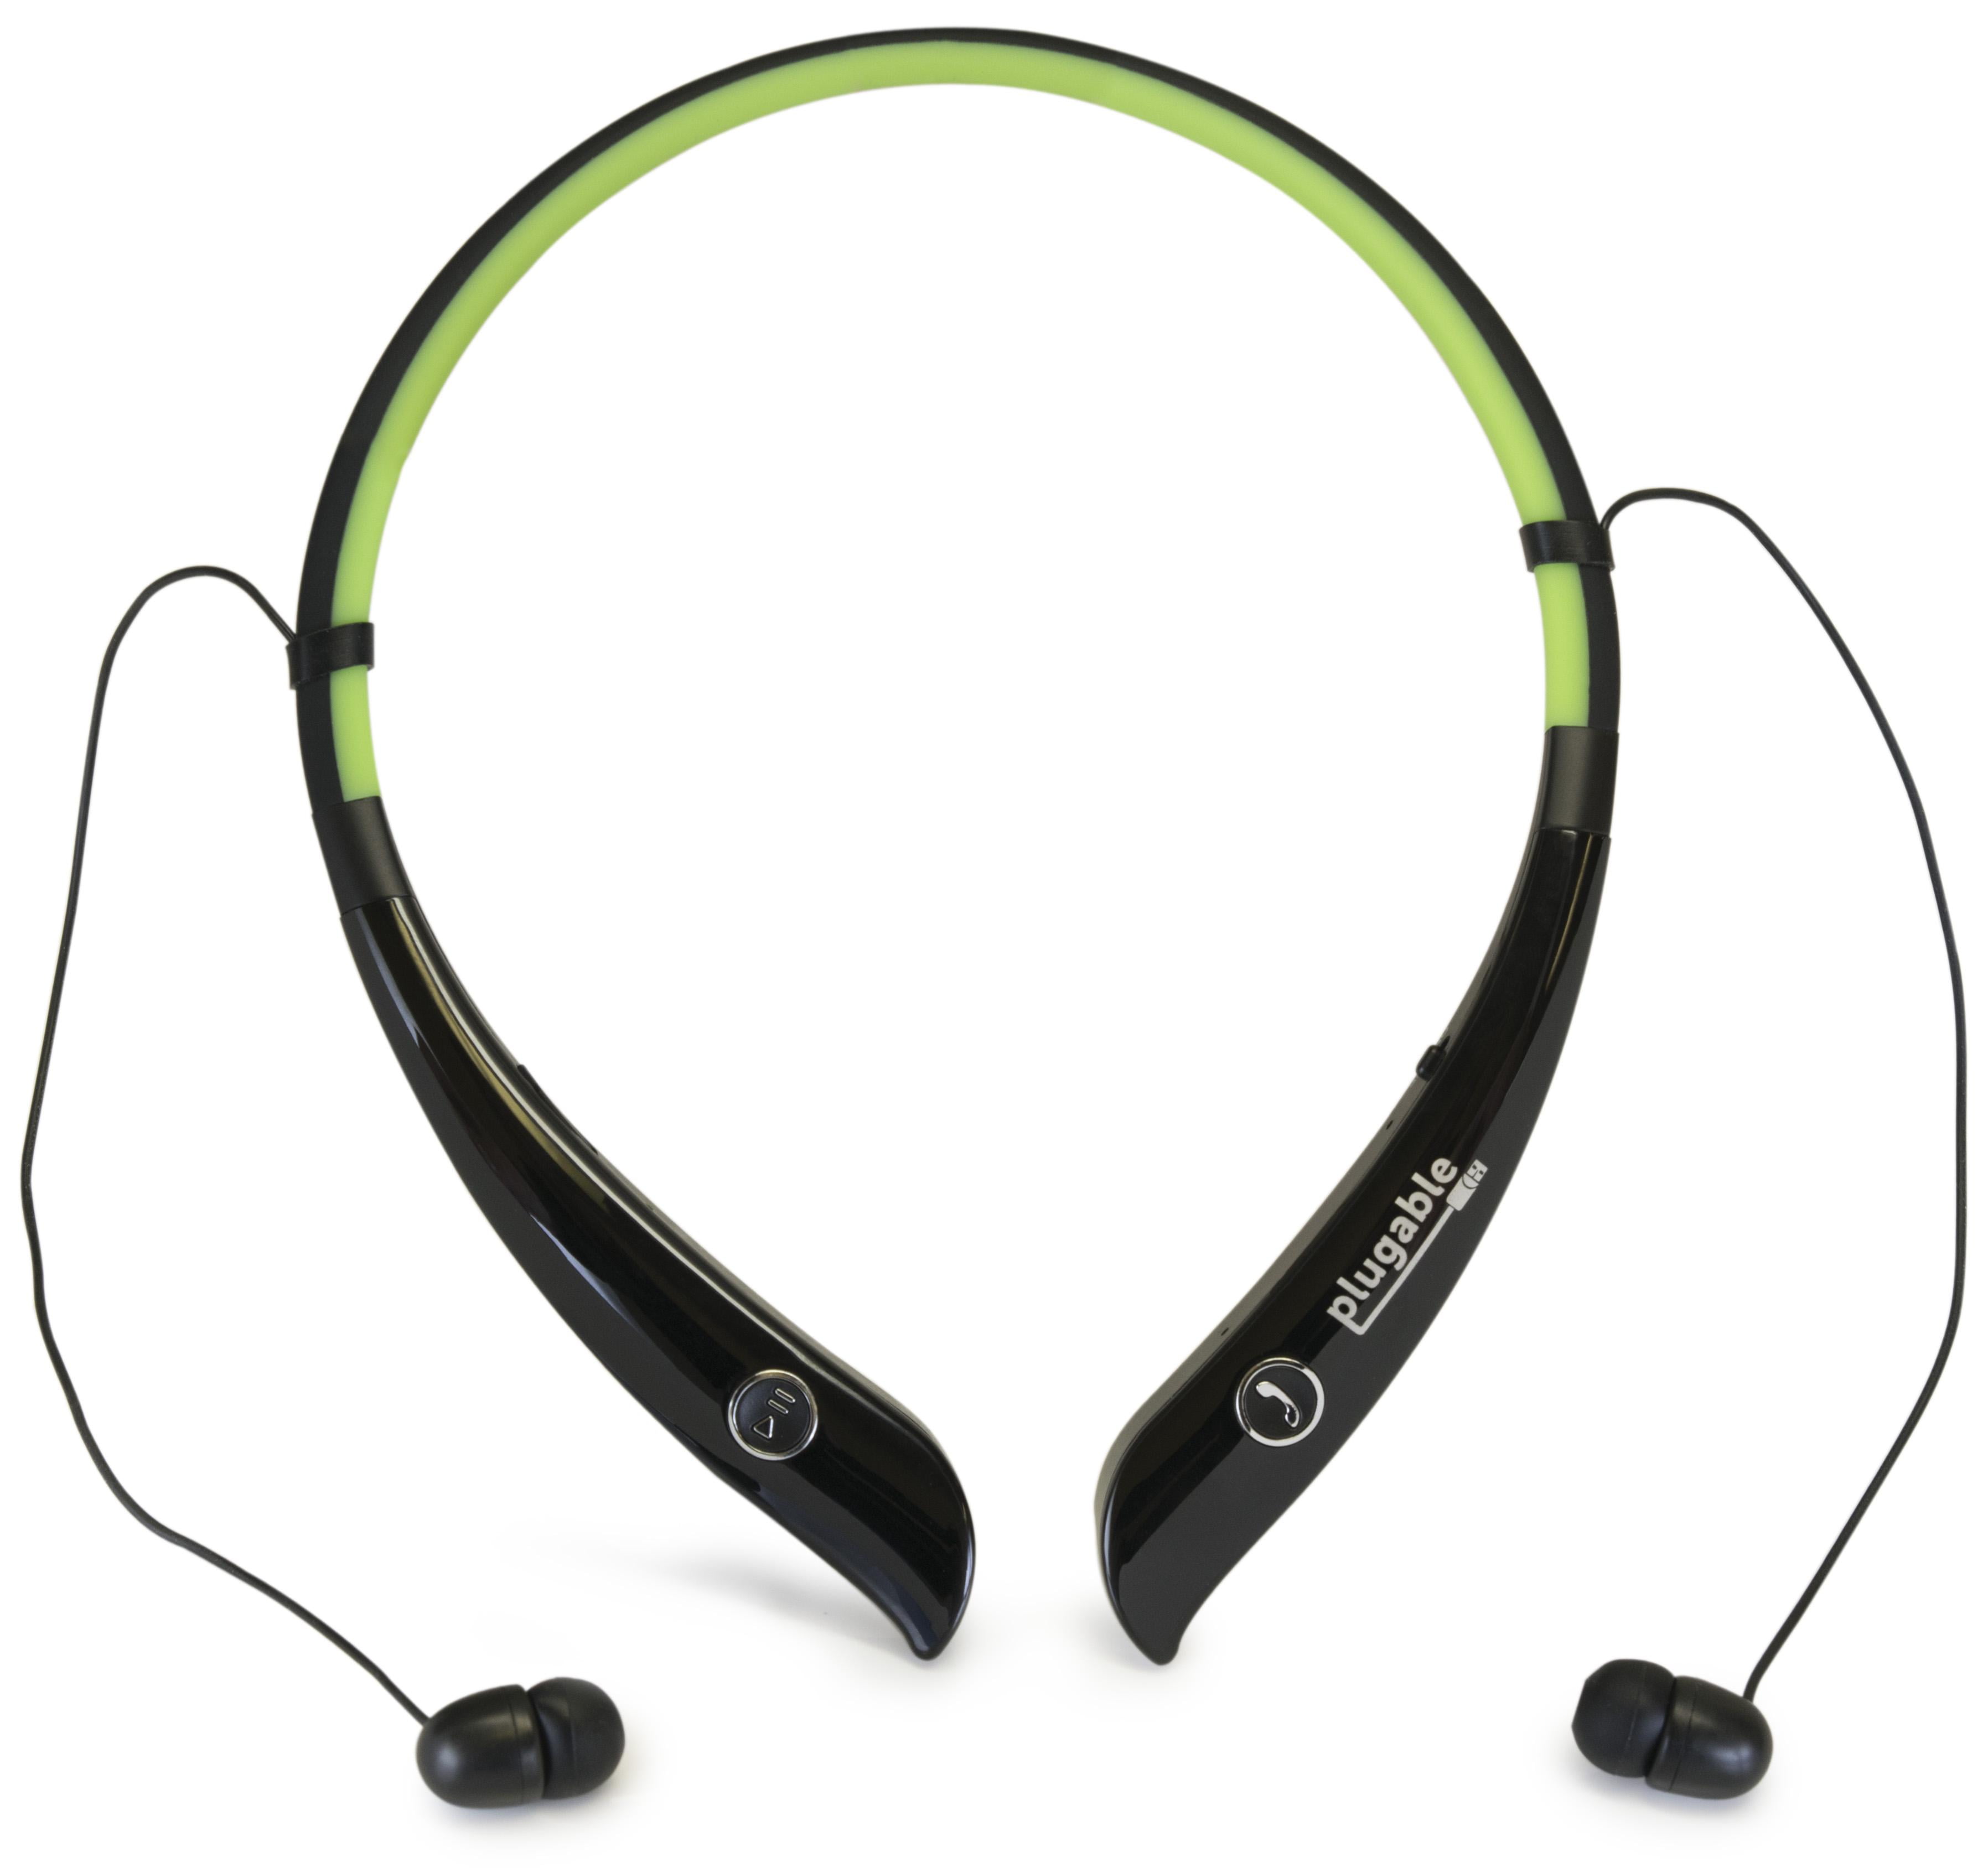 Plugable Bluetooth Sport Neckband Headphones With Built In Mic And